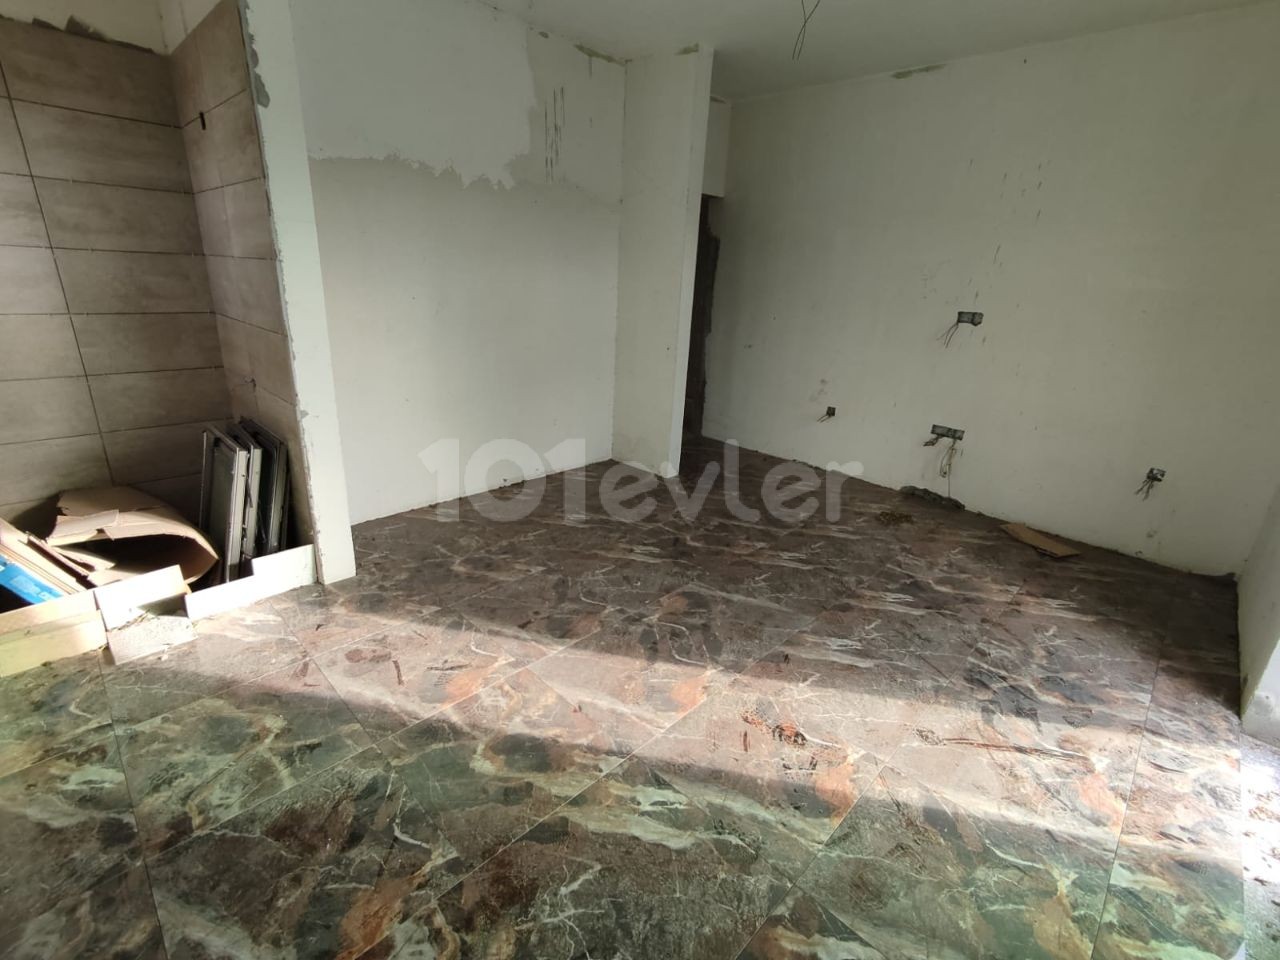 DETACHED HOUSE FOR SALE IN MİNARELİKÖY AREA